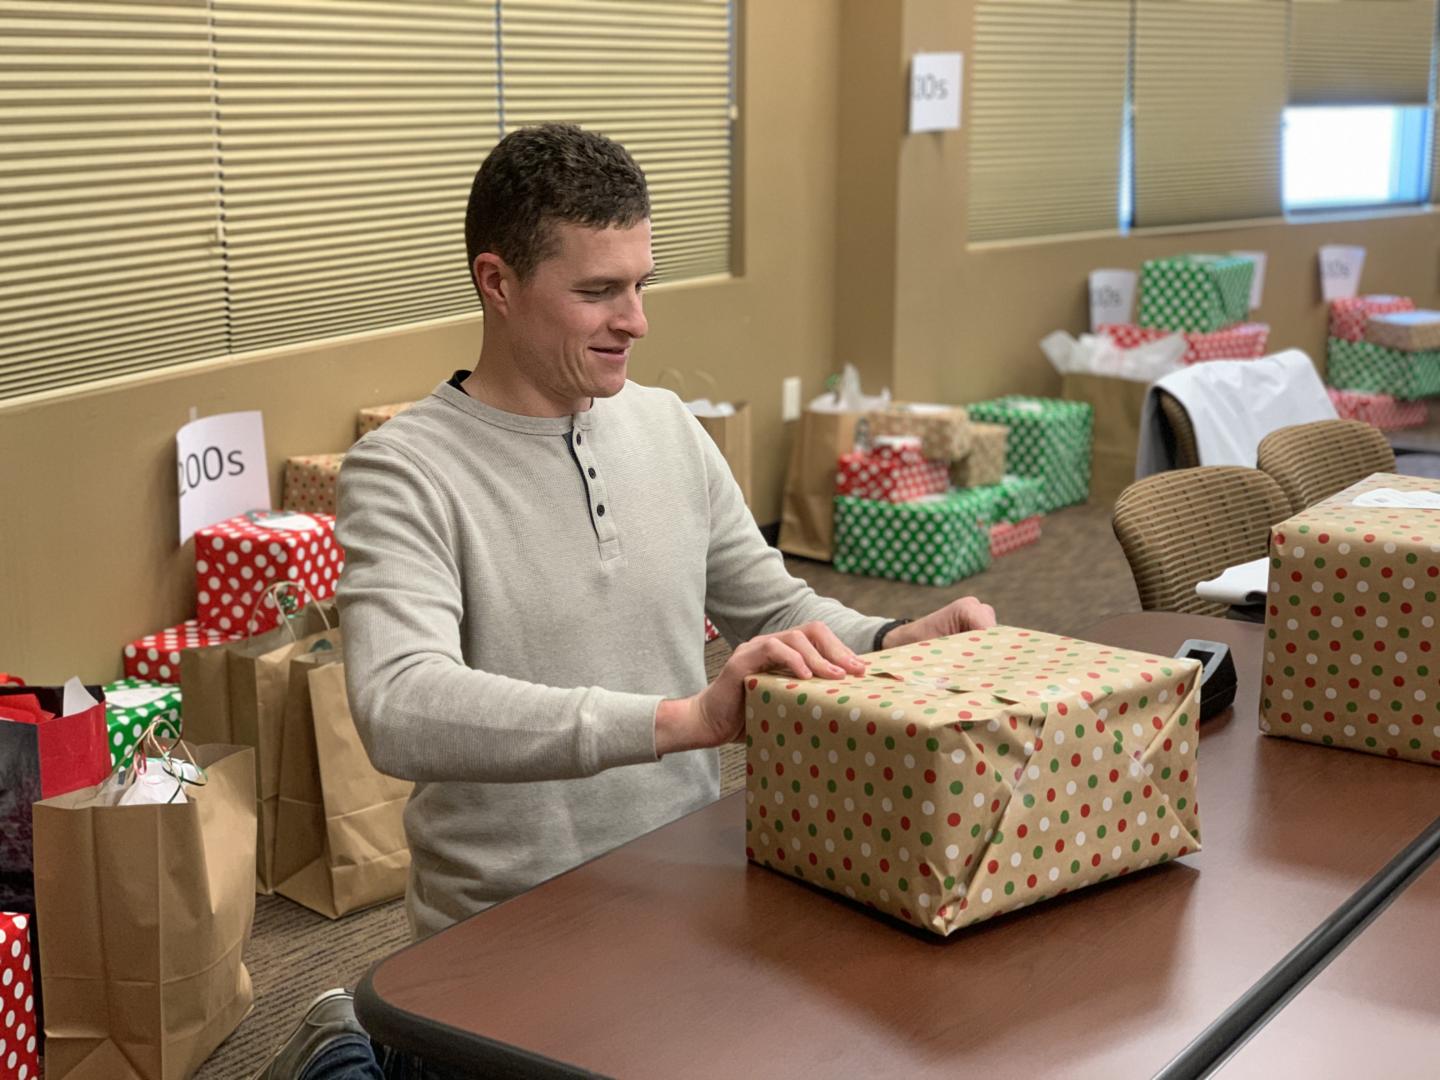 CCEC Employee wrapping presents